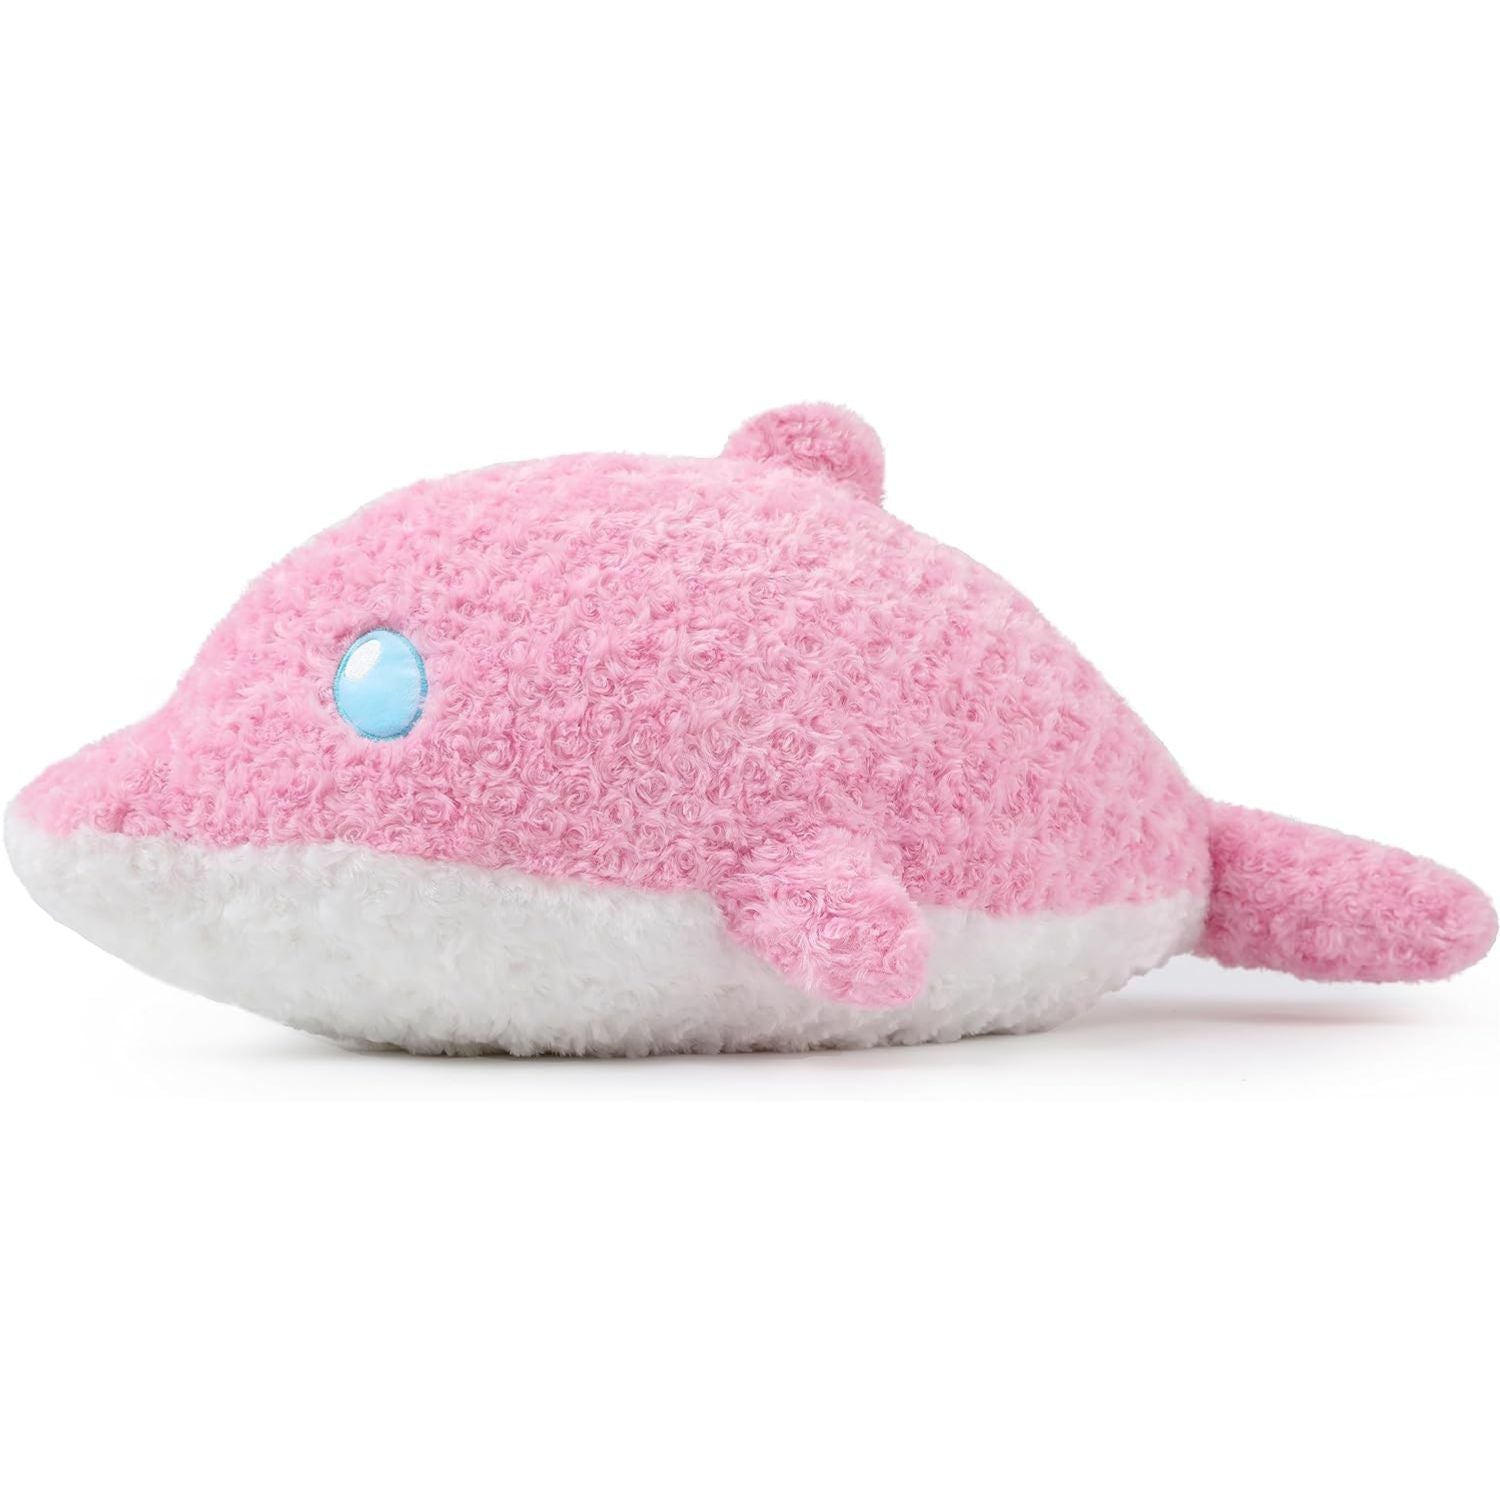 Dolphin Plush Toy Stuffed Animals, Pink, 31.5 Inches